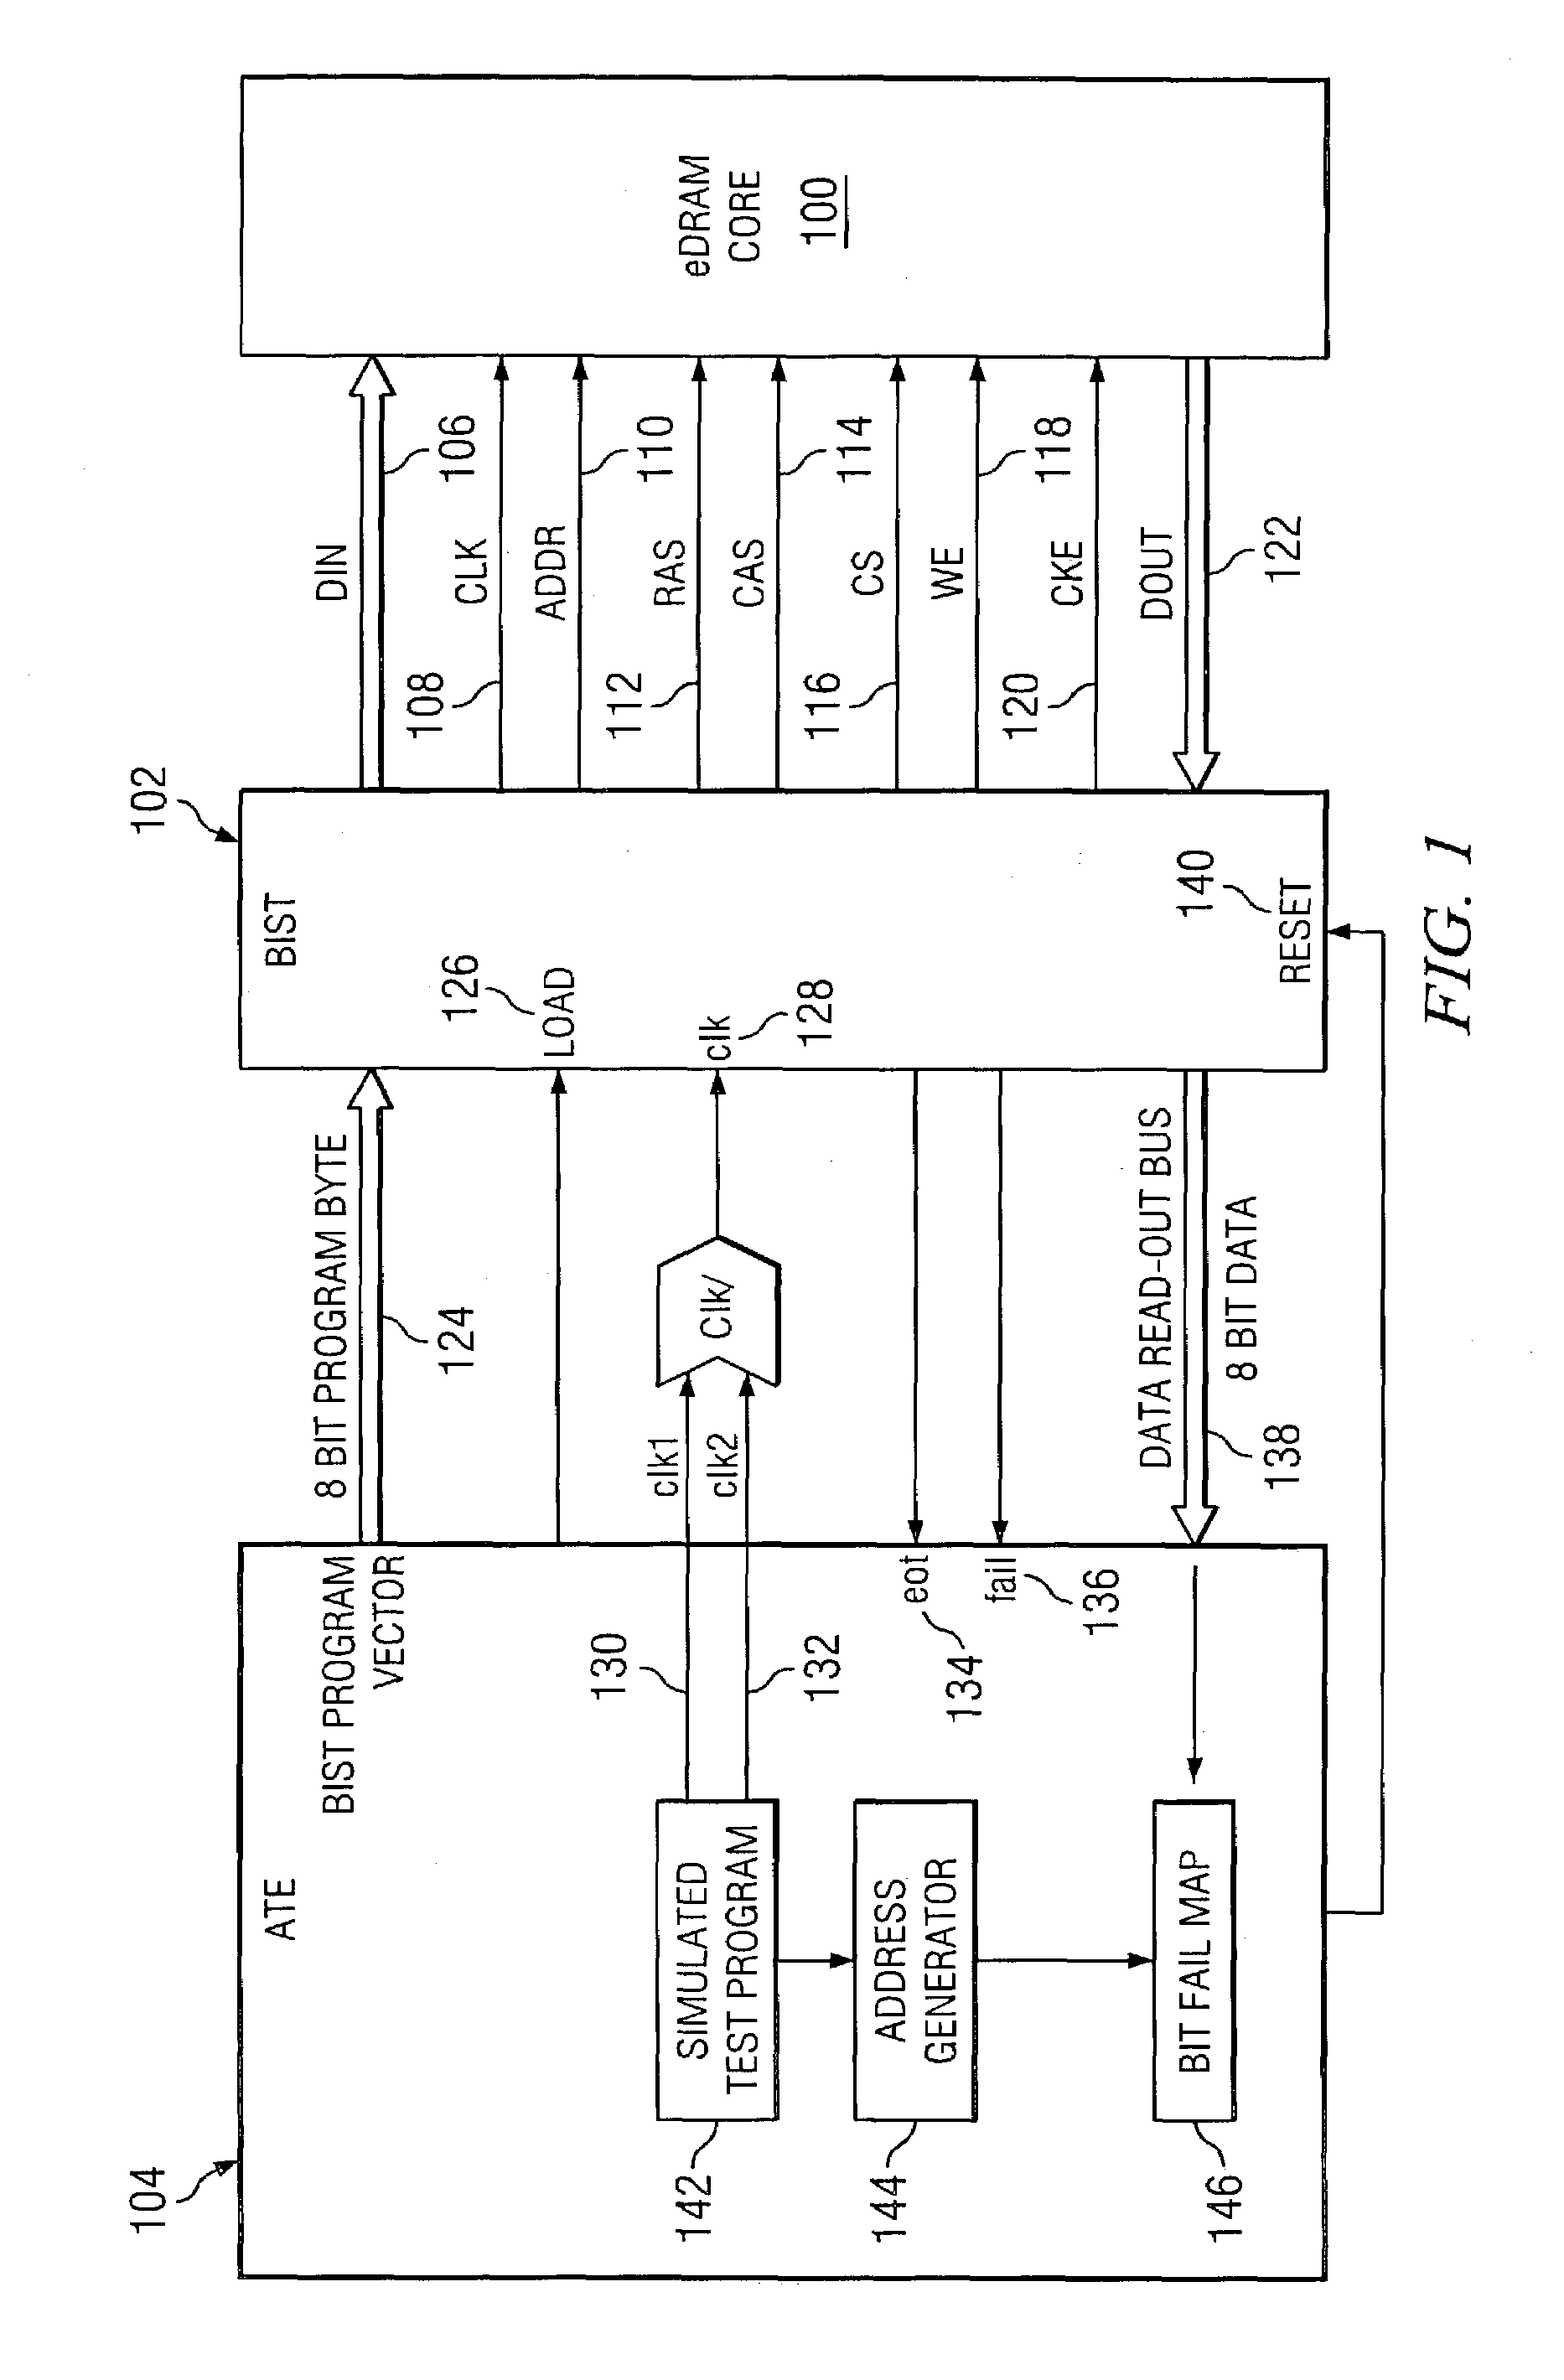 Built-in self test system and method